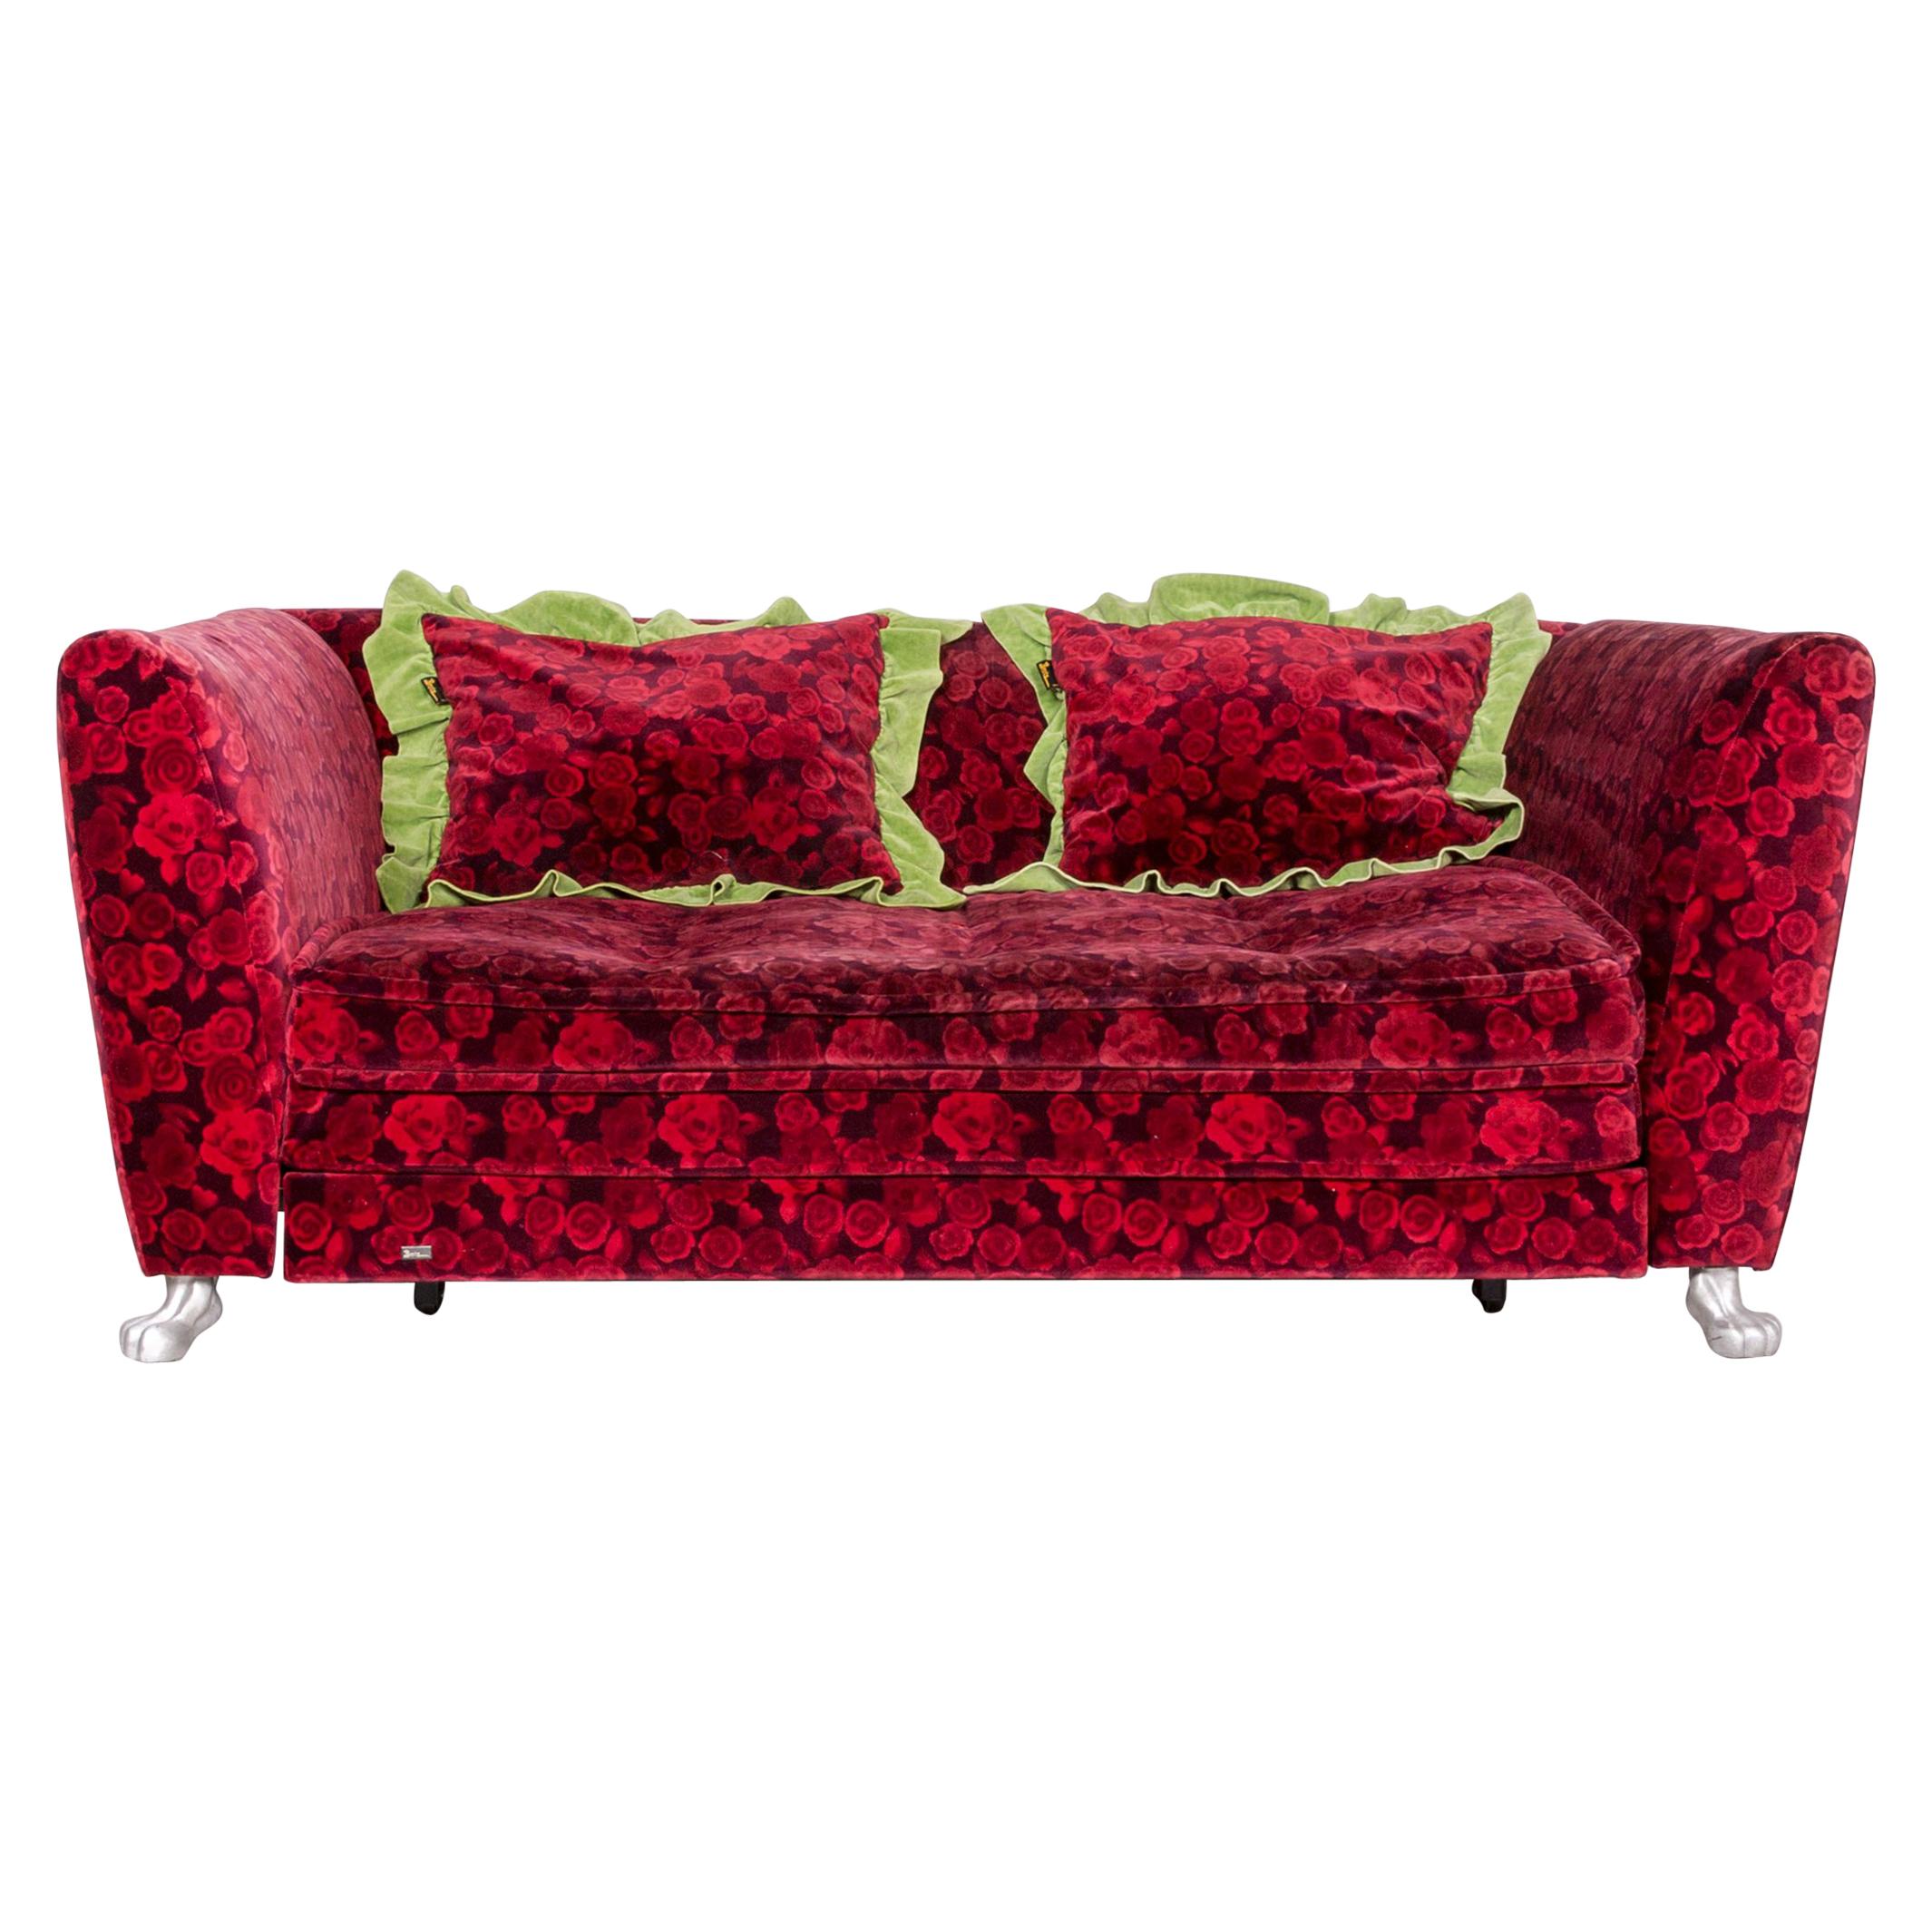 Bretz Monster Fabric Sofa Red Three-Seat Couch Function Sofa For Sale